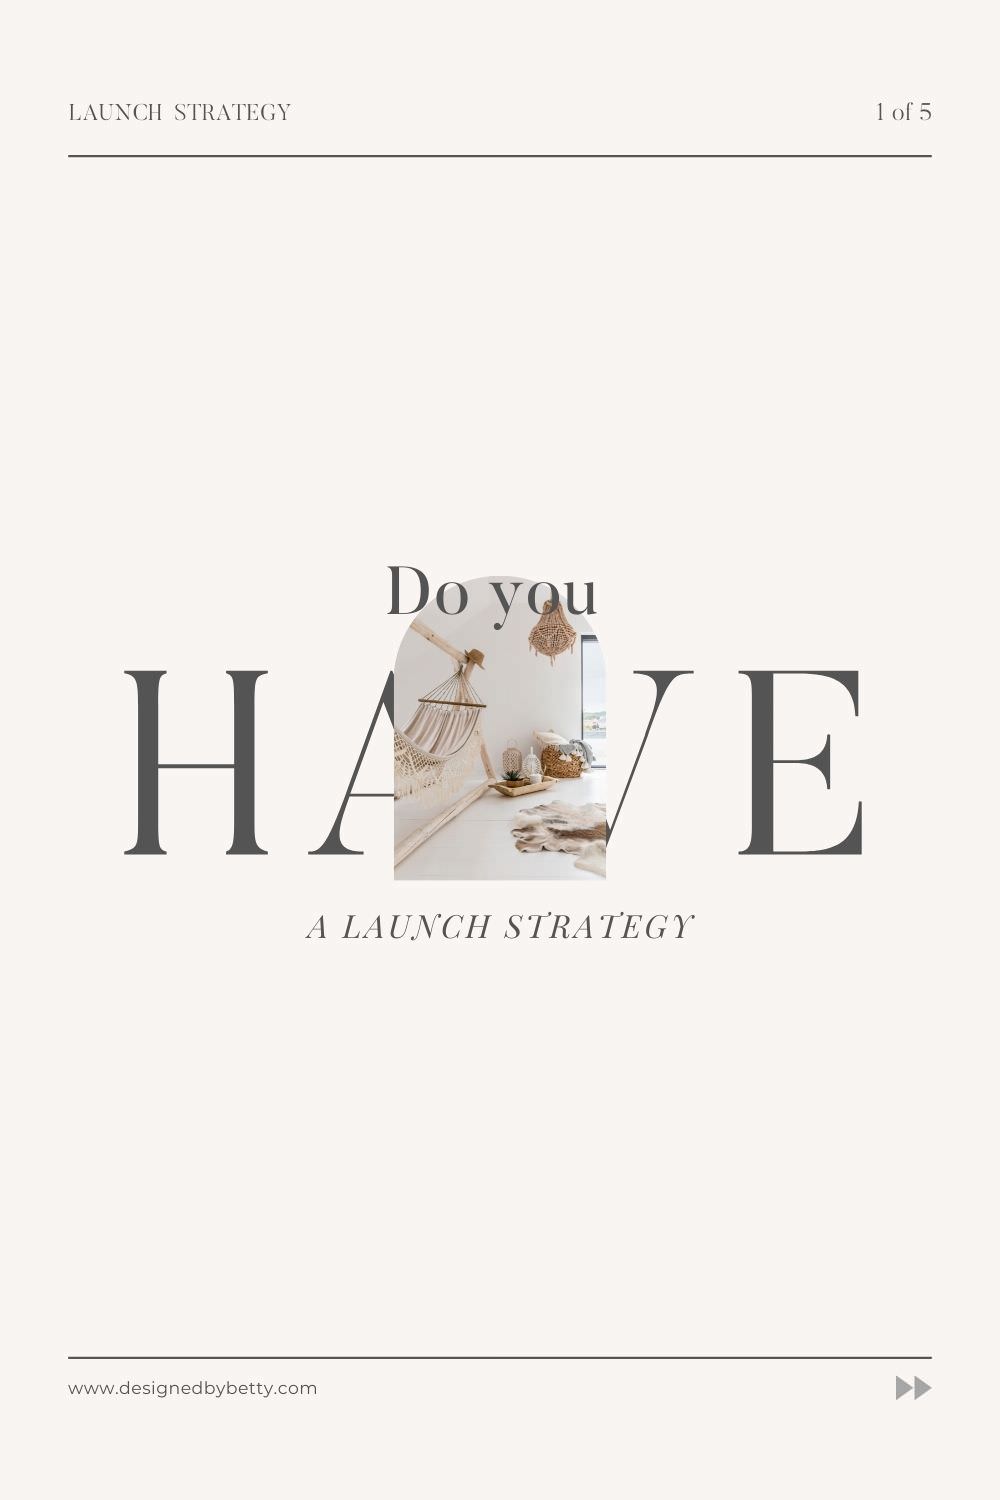 Do You Have a Successful Launch Strategy for your online business?